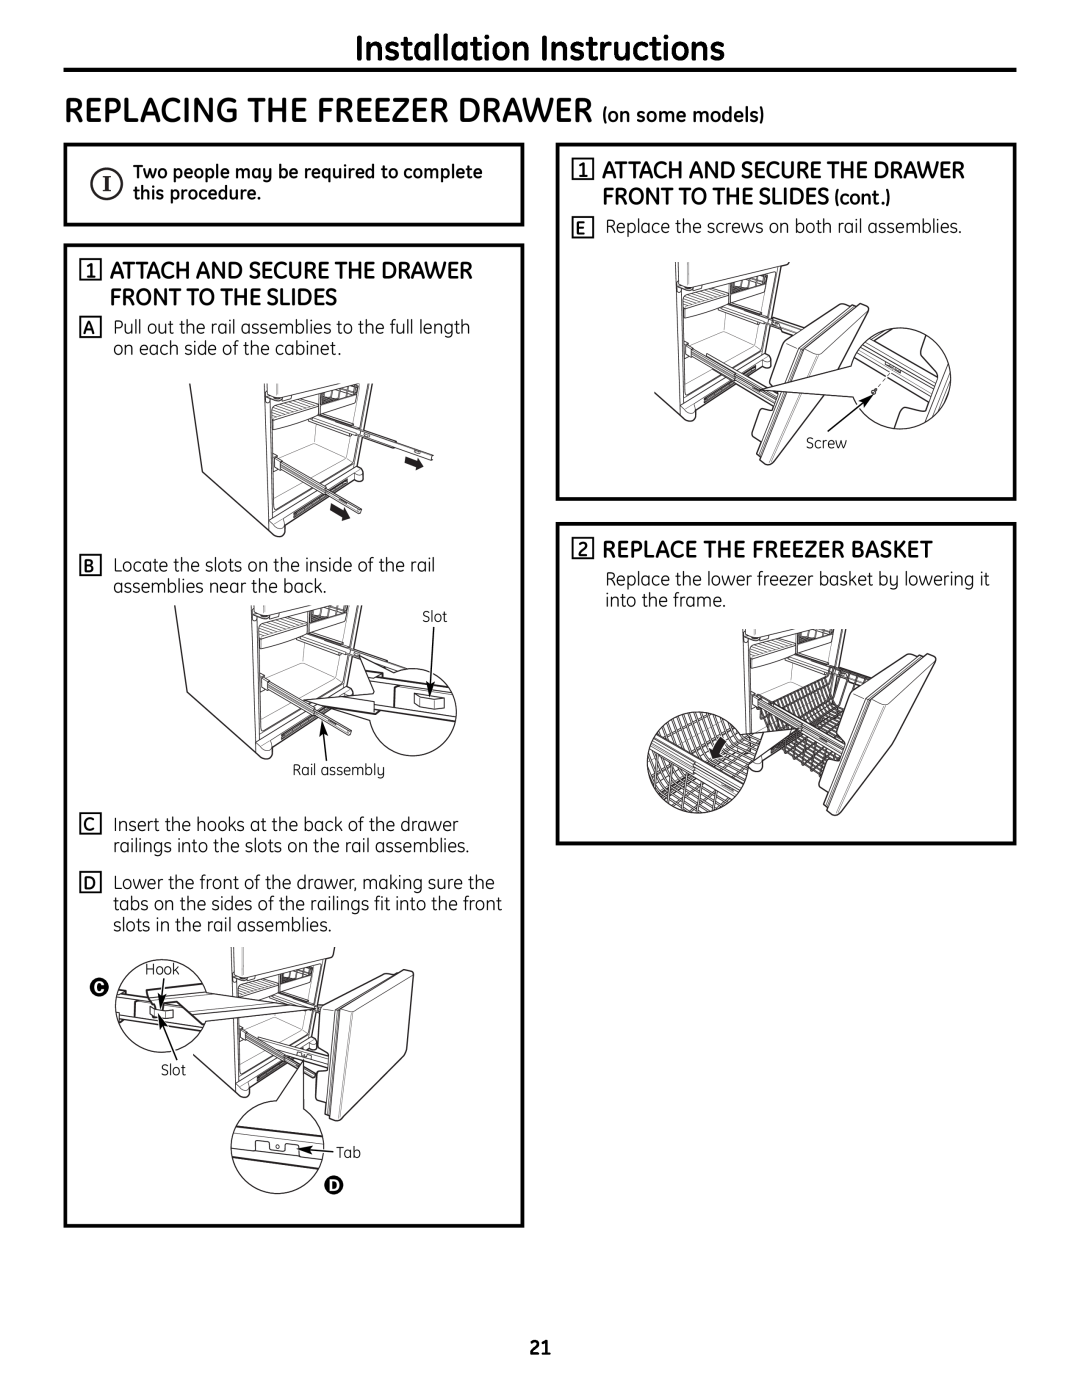 GE 200D9366P004 Installation Instructions REPLACING THE FREEZER DRAWER on some models, Replace The Freezer Basket 